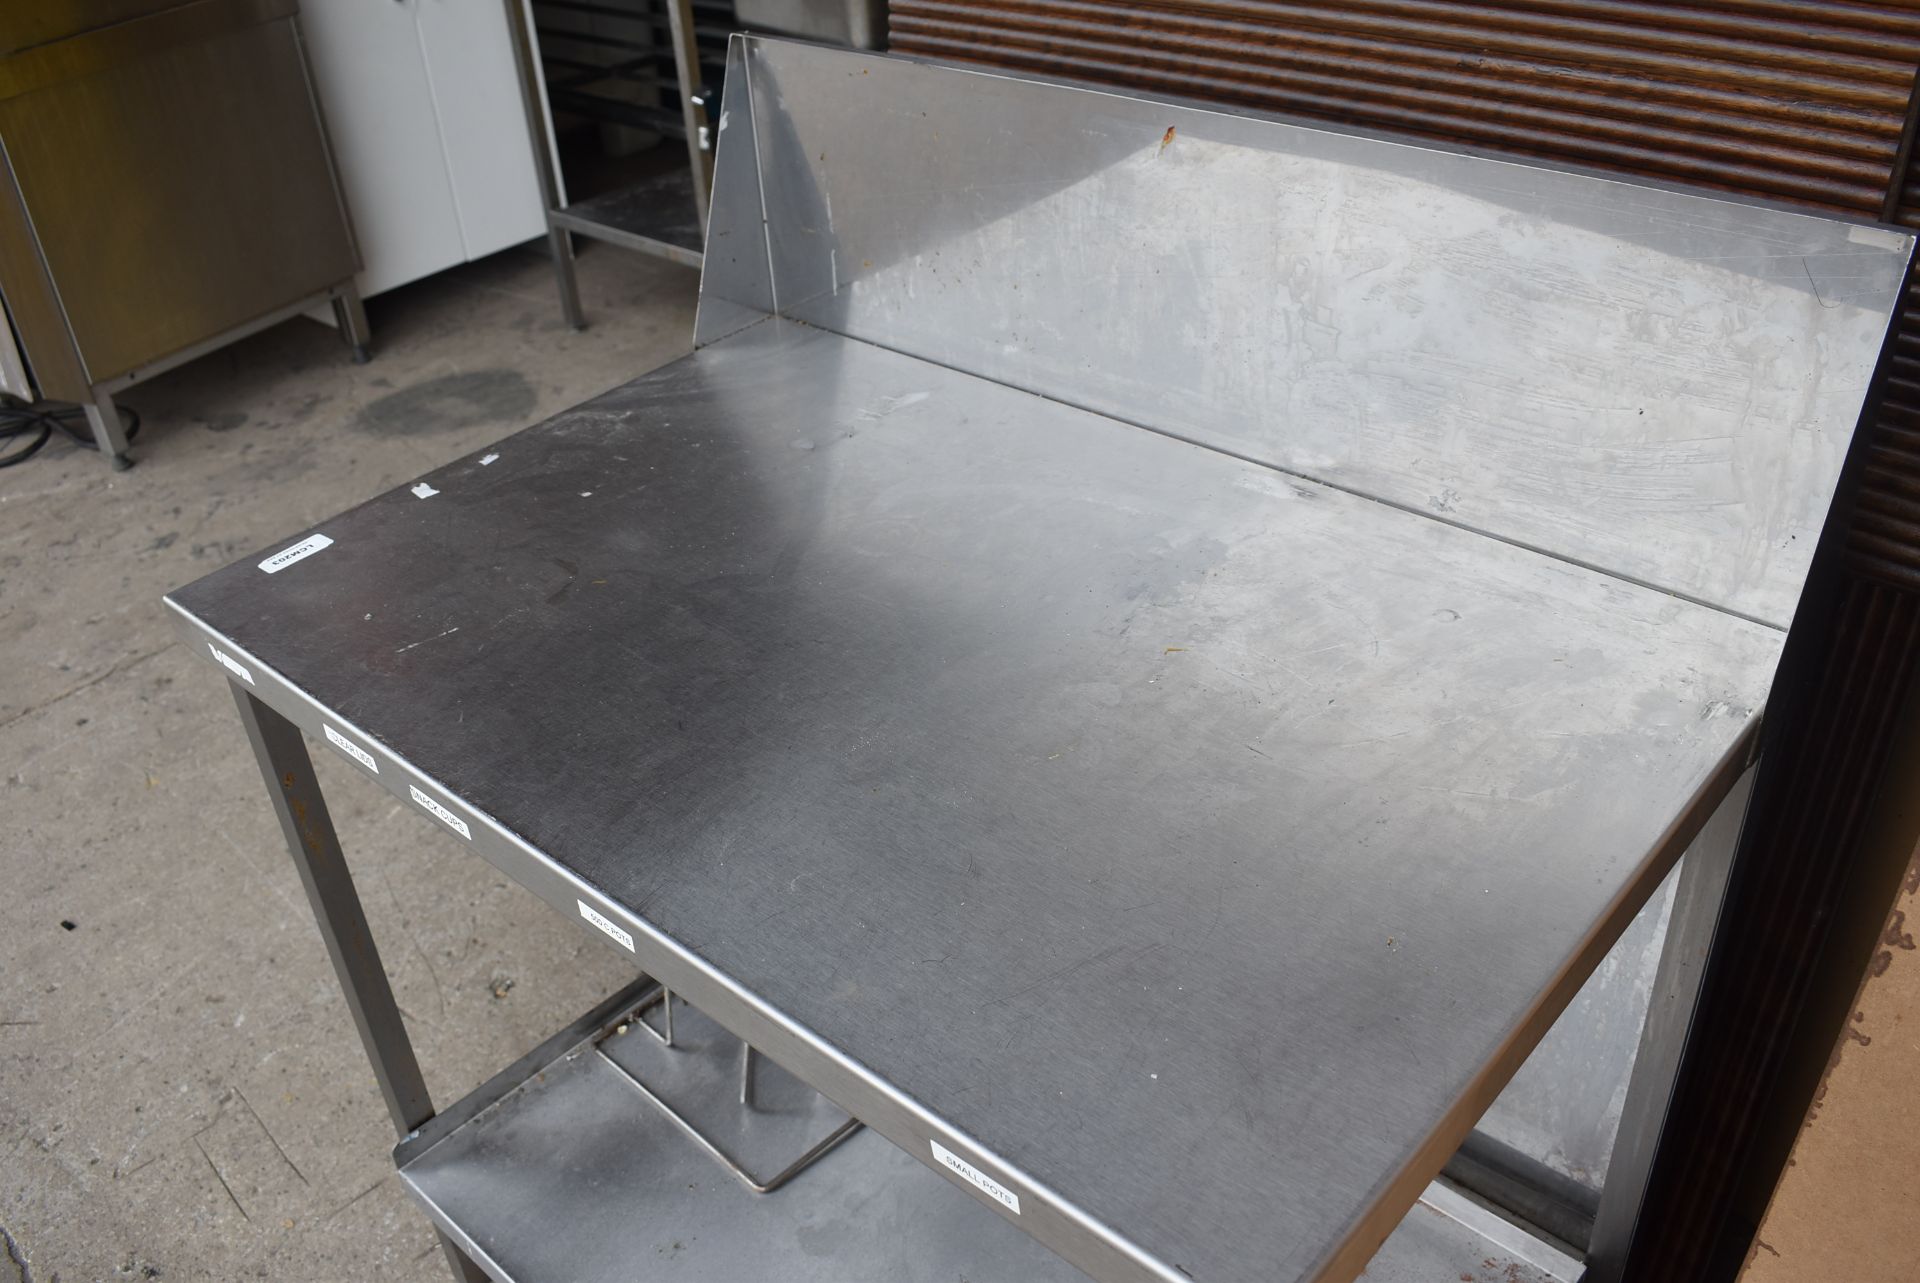 1 x Stainless Steel Prep Table With Splashback - Dimensions H82 x W93 x D62 cms - Recently Removed - Image 5 of 6